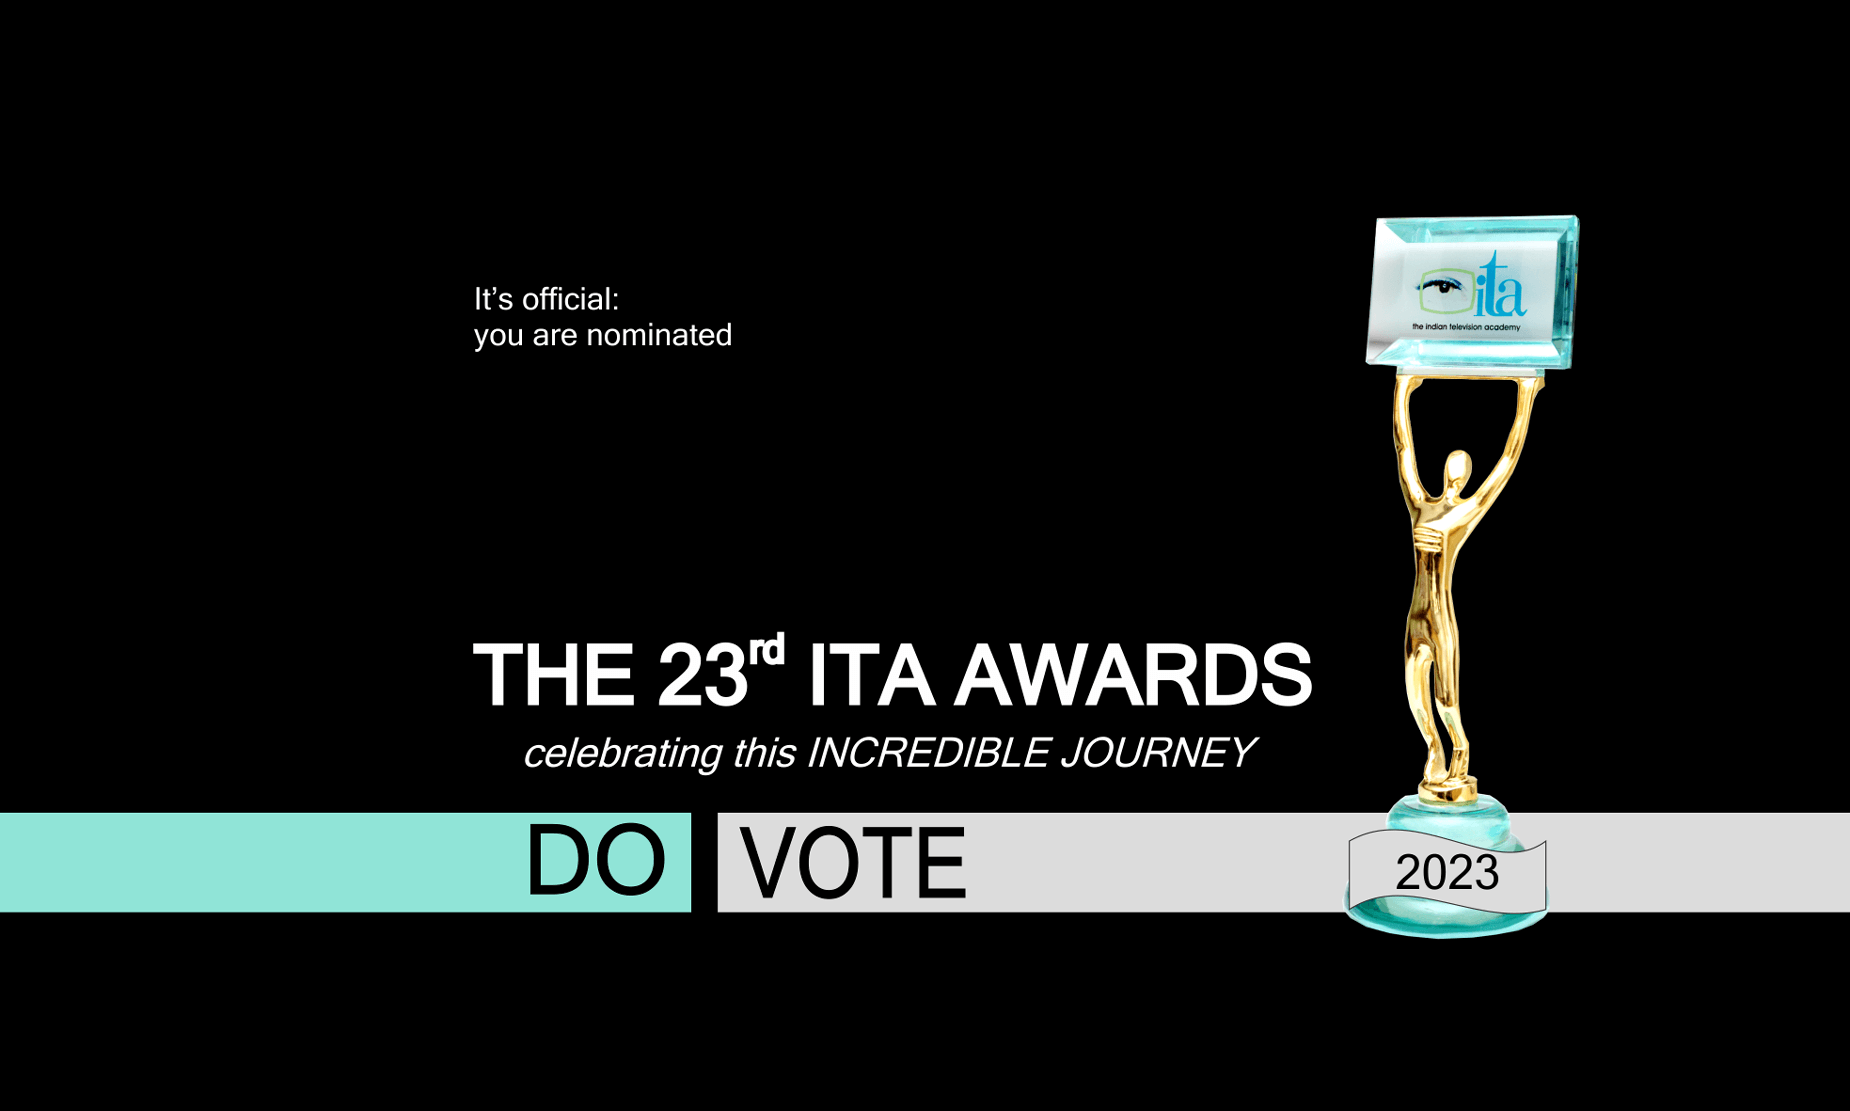 The 23rd ITA Awards Celebrating 23 years of this INCREDIBLE JOURNEY...